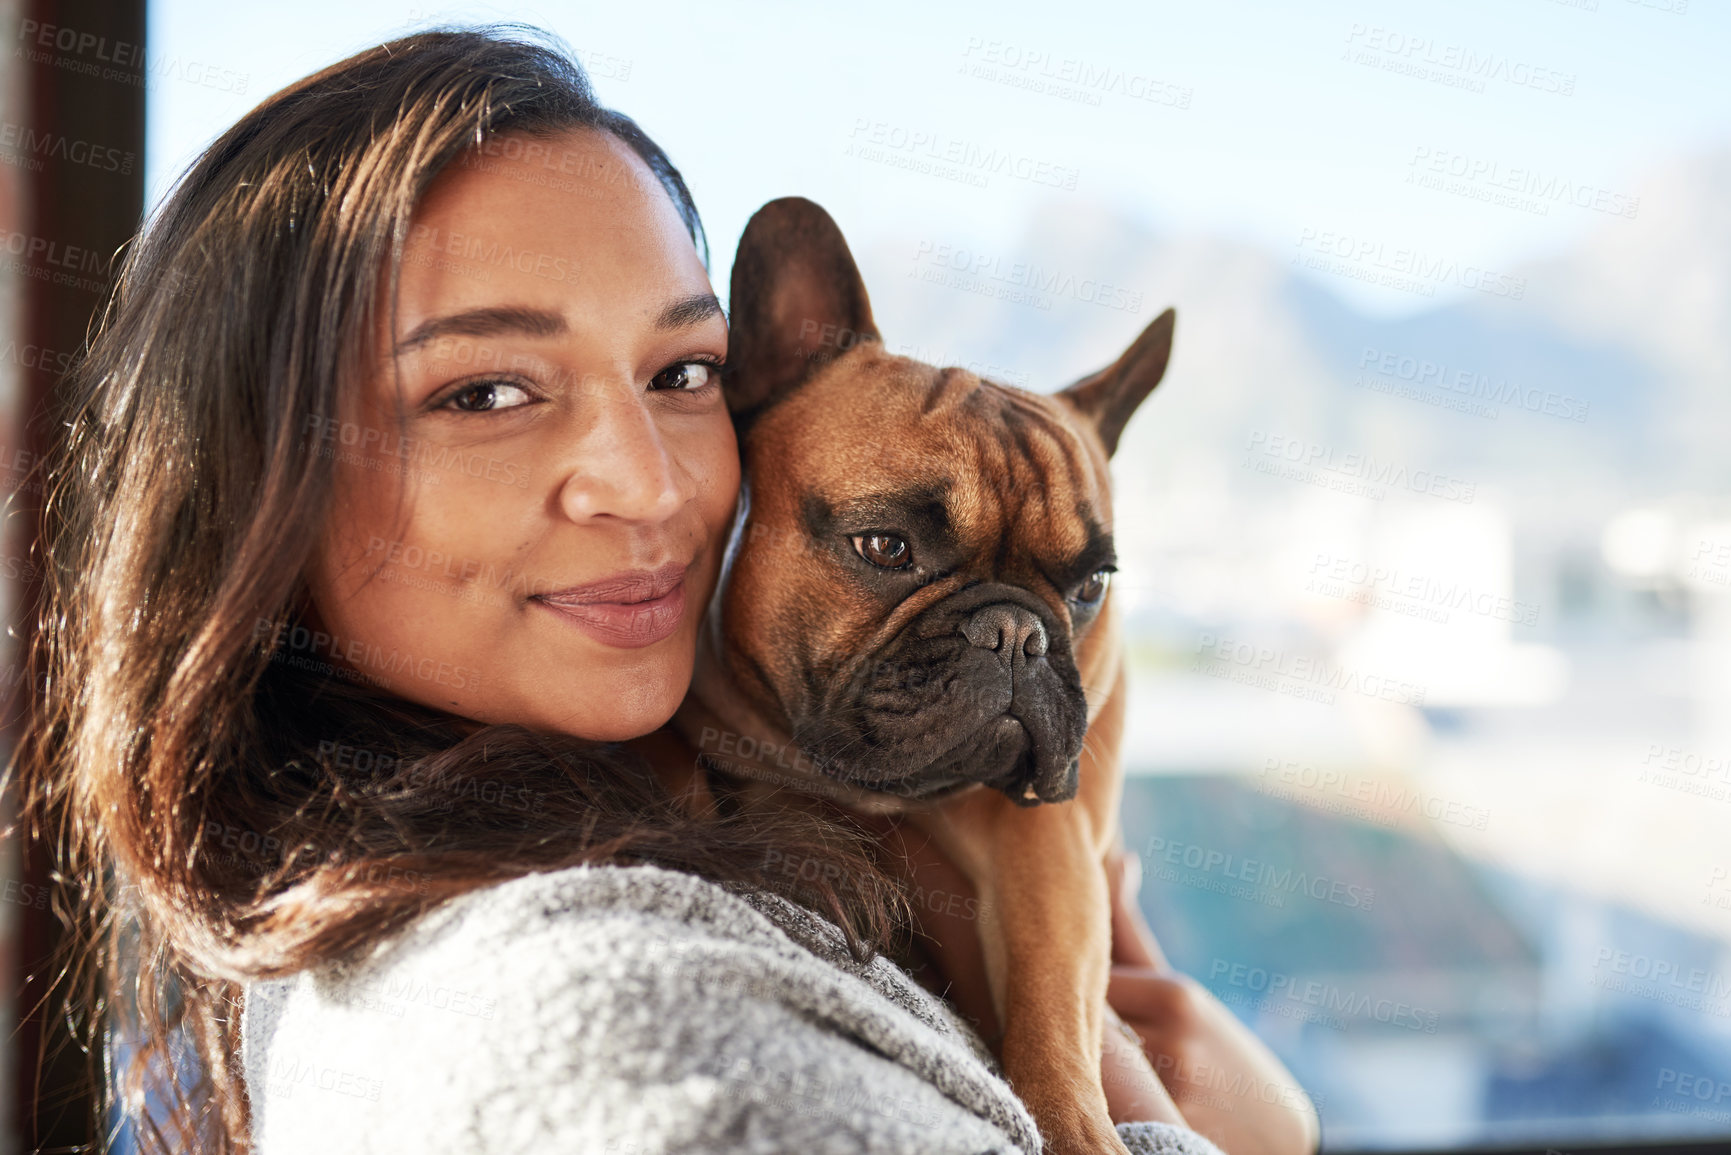 Buy stock photo Portrait of a young woman relaxing with her dog at home